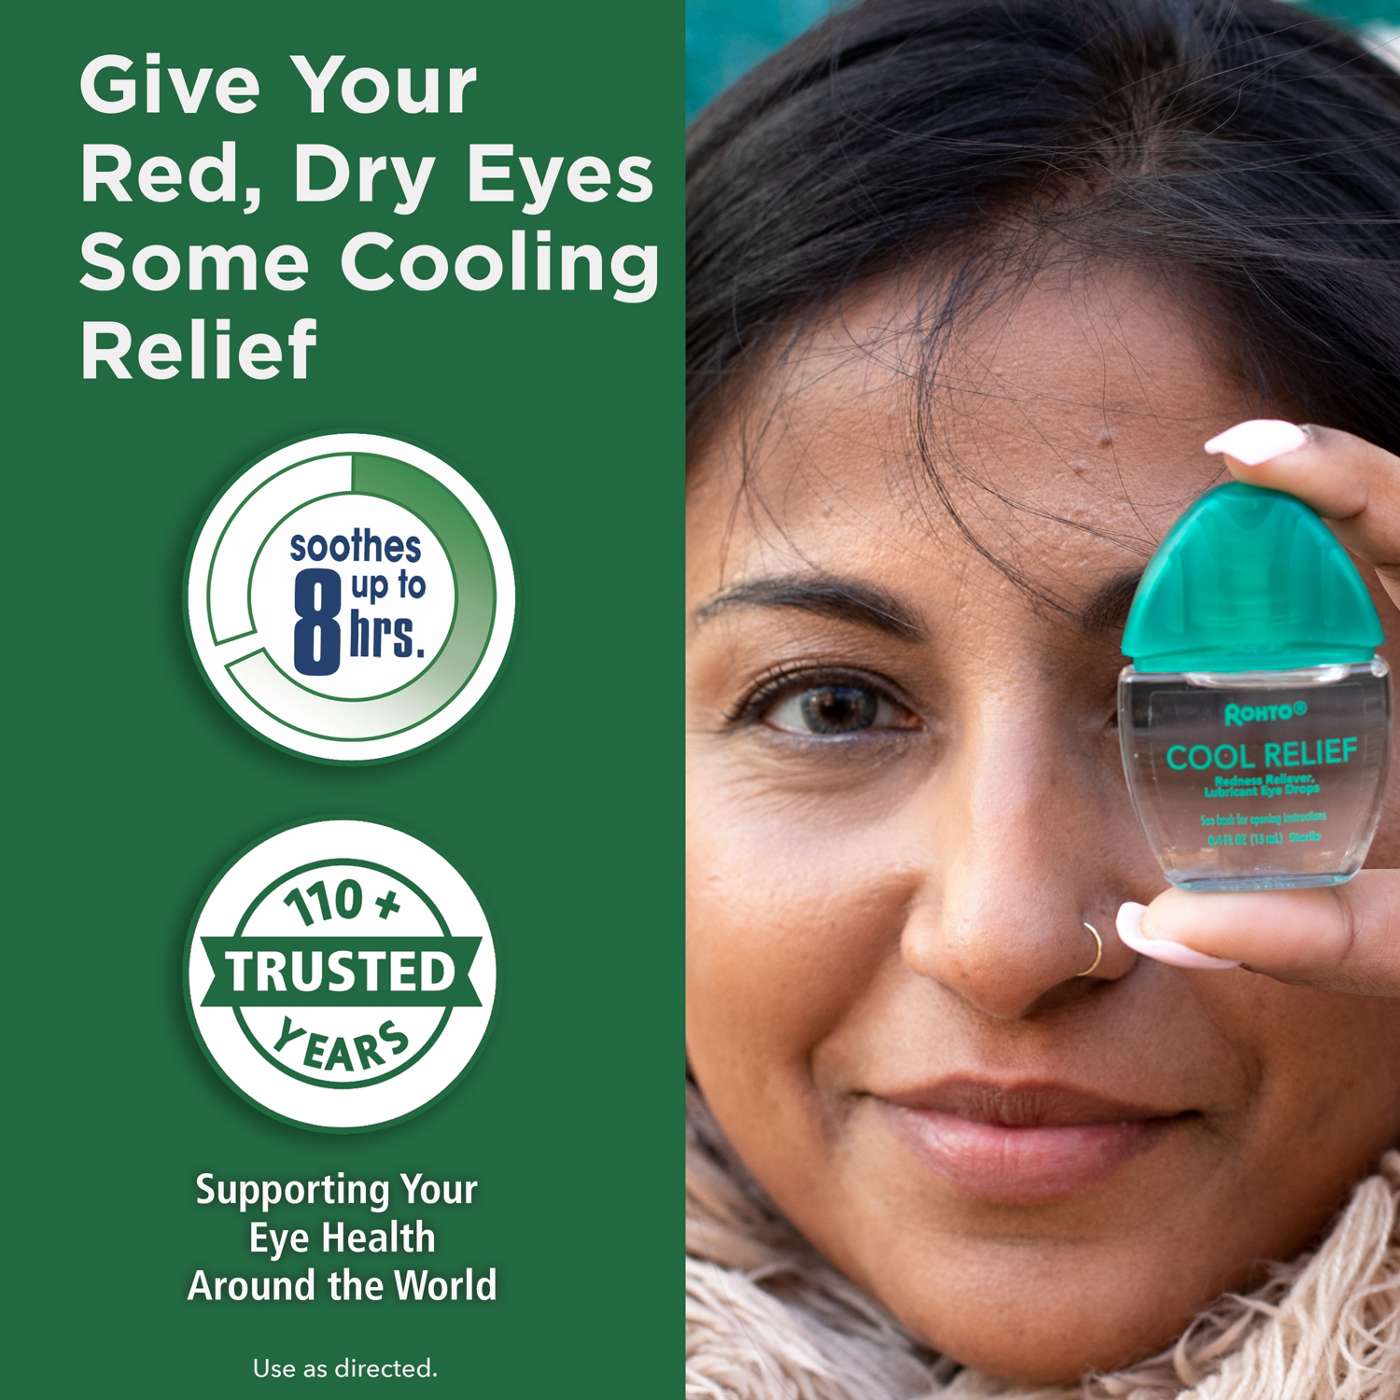 Rohto Cool Relief Lubricant Eye Drops; image 4 of 7